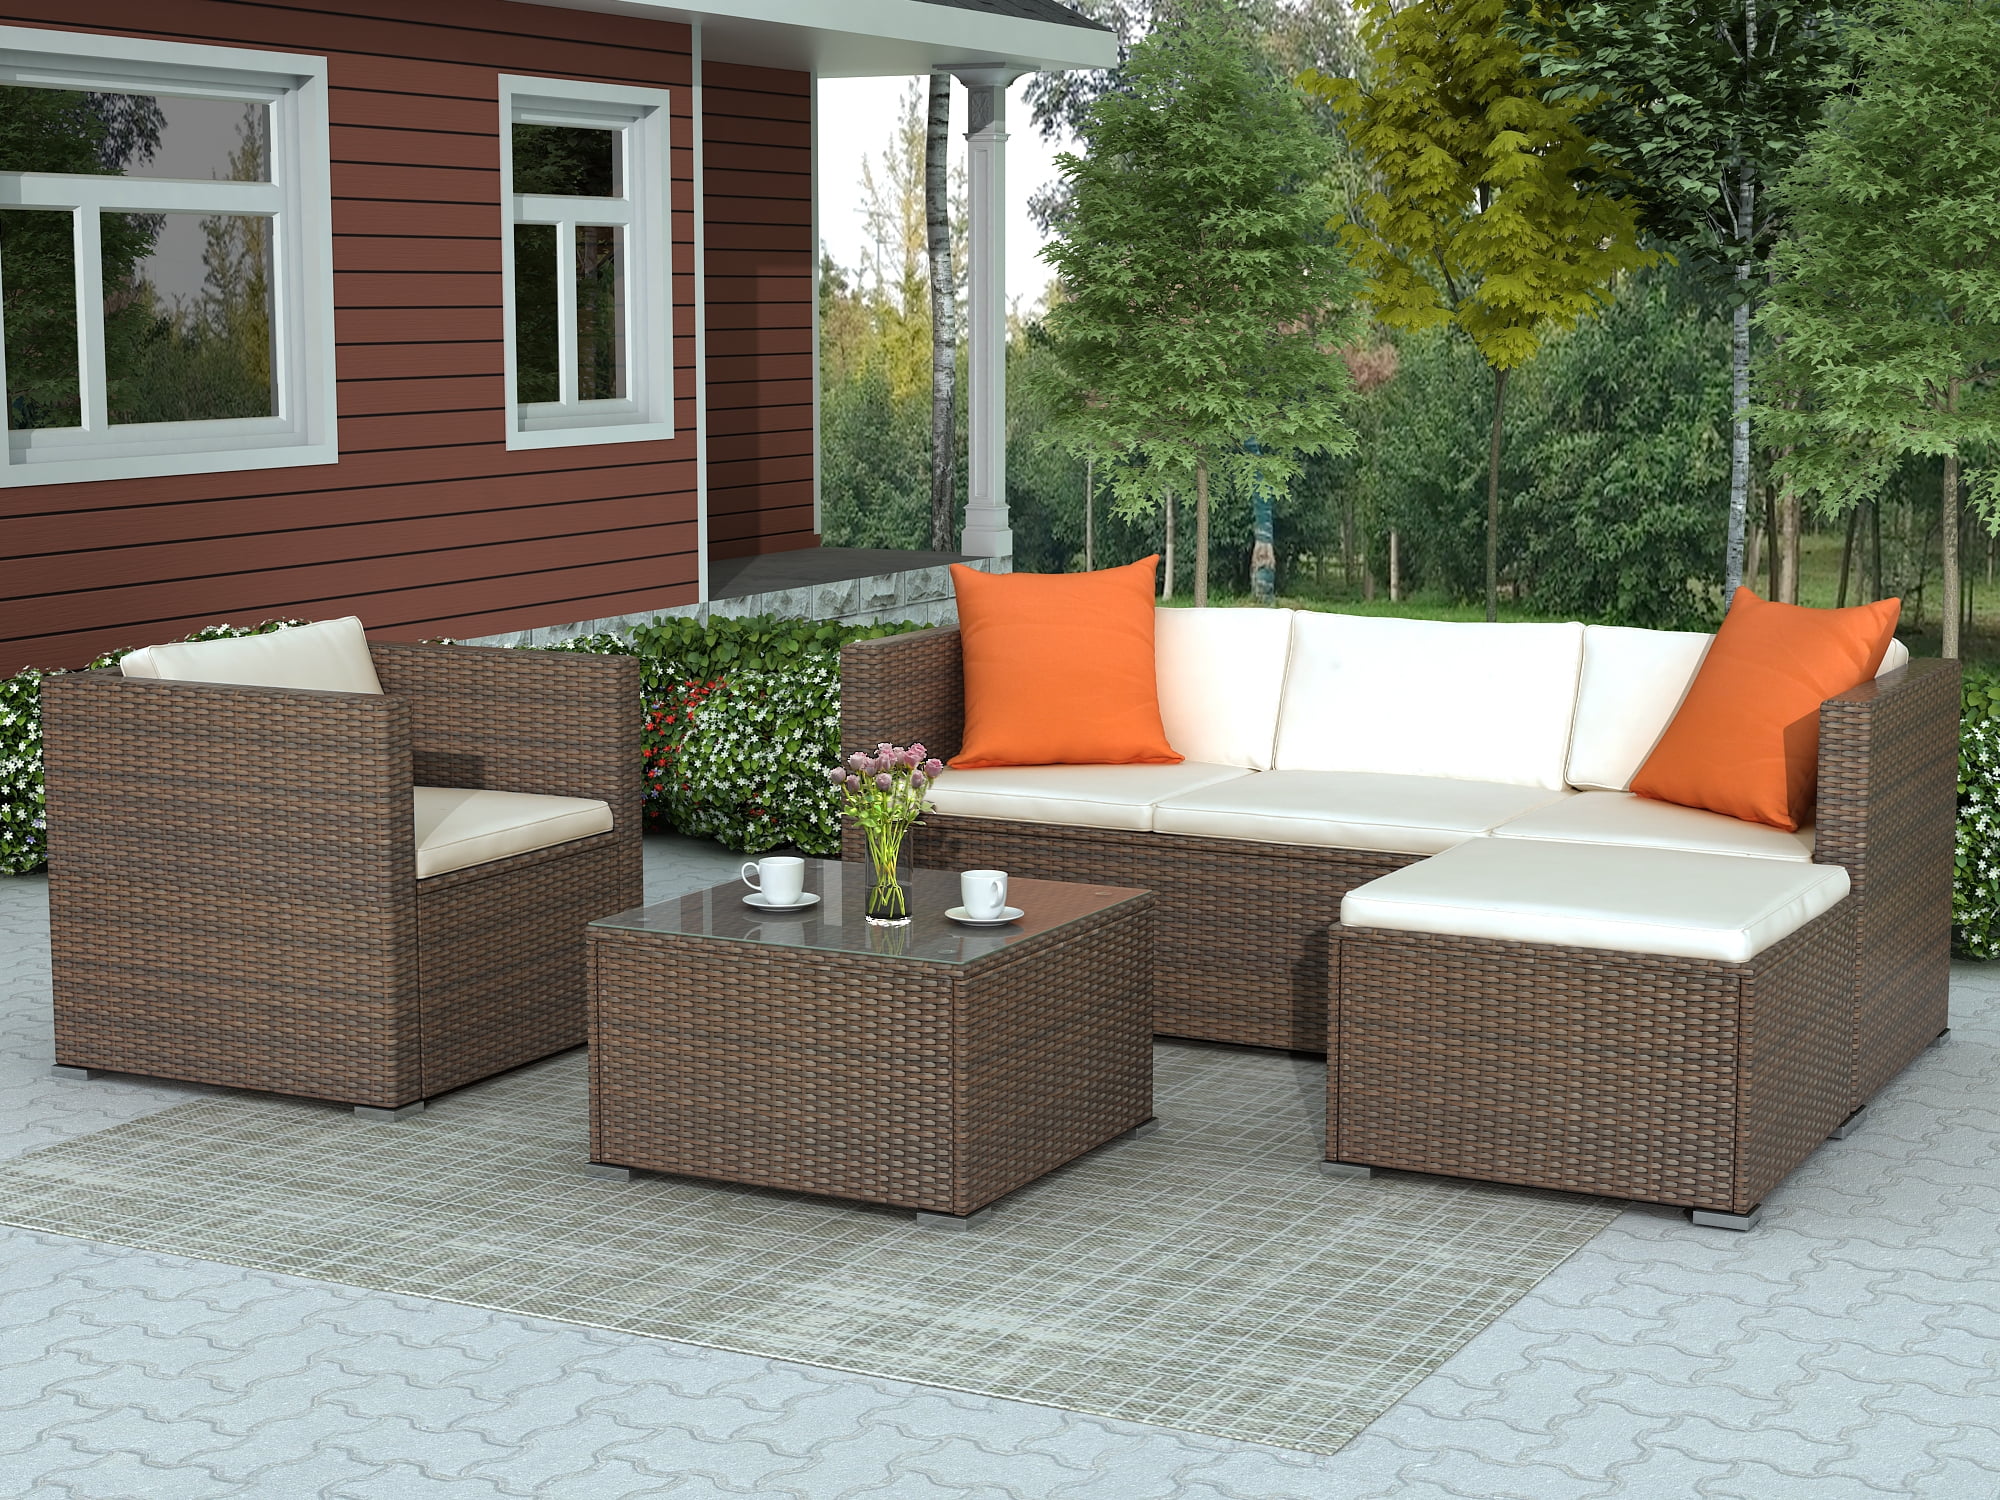 Wicker Patio Sets, 4 Piece Patio Furniture Sofa Sets with 3-Seat Sofa, Wicker Chair, Ottoman, Coffee Table, All-Weather Patio Conversation Set with Cushions for Backyard, Garden, Poolside